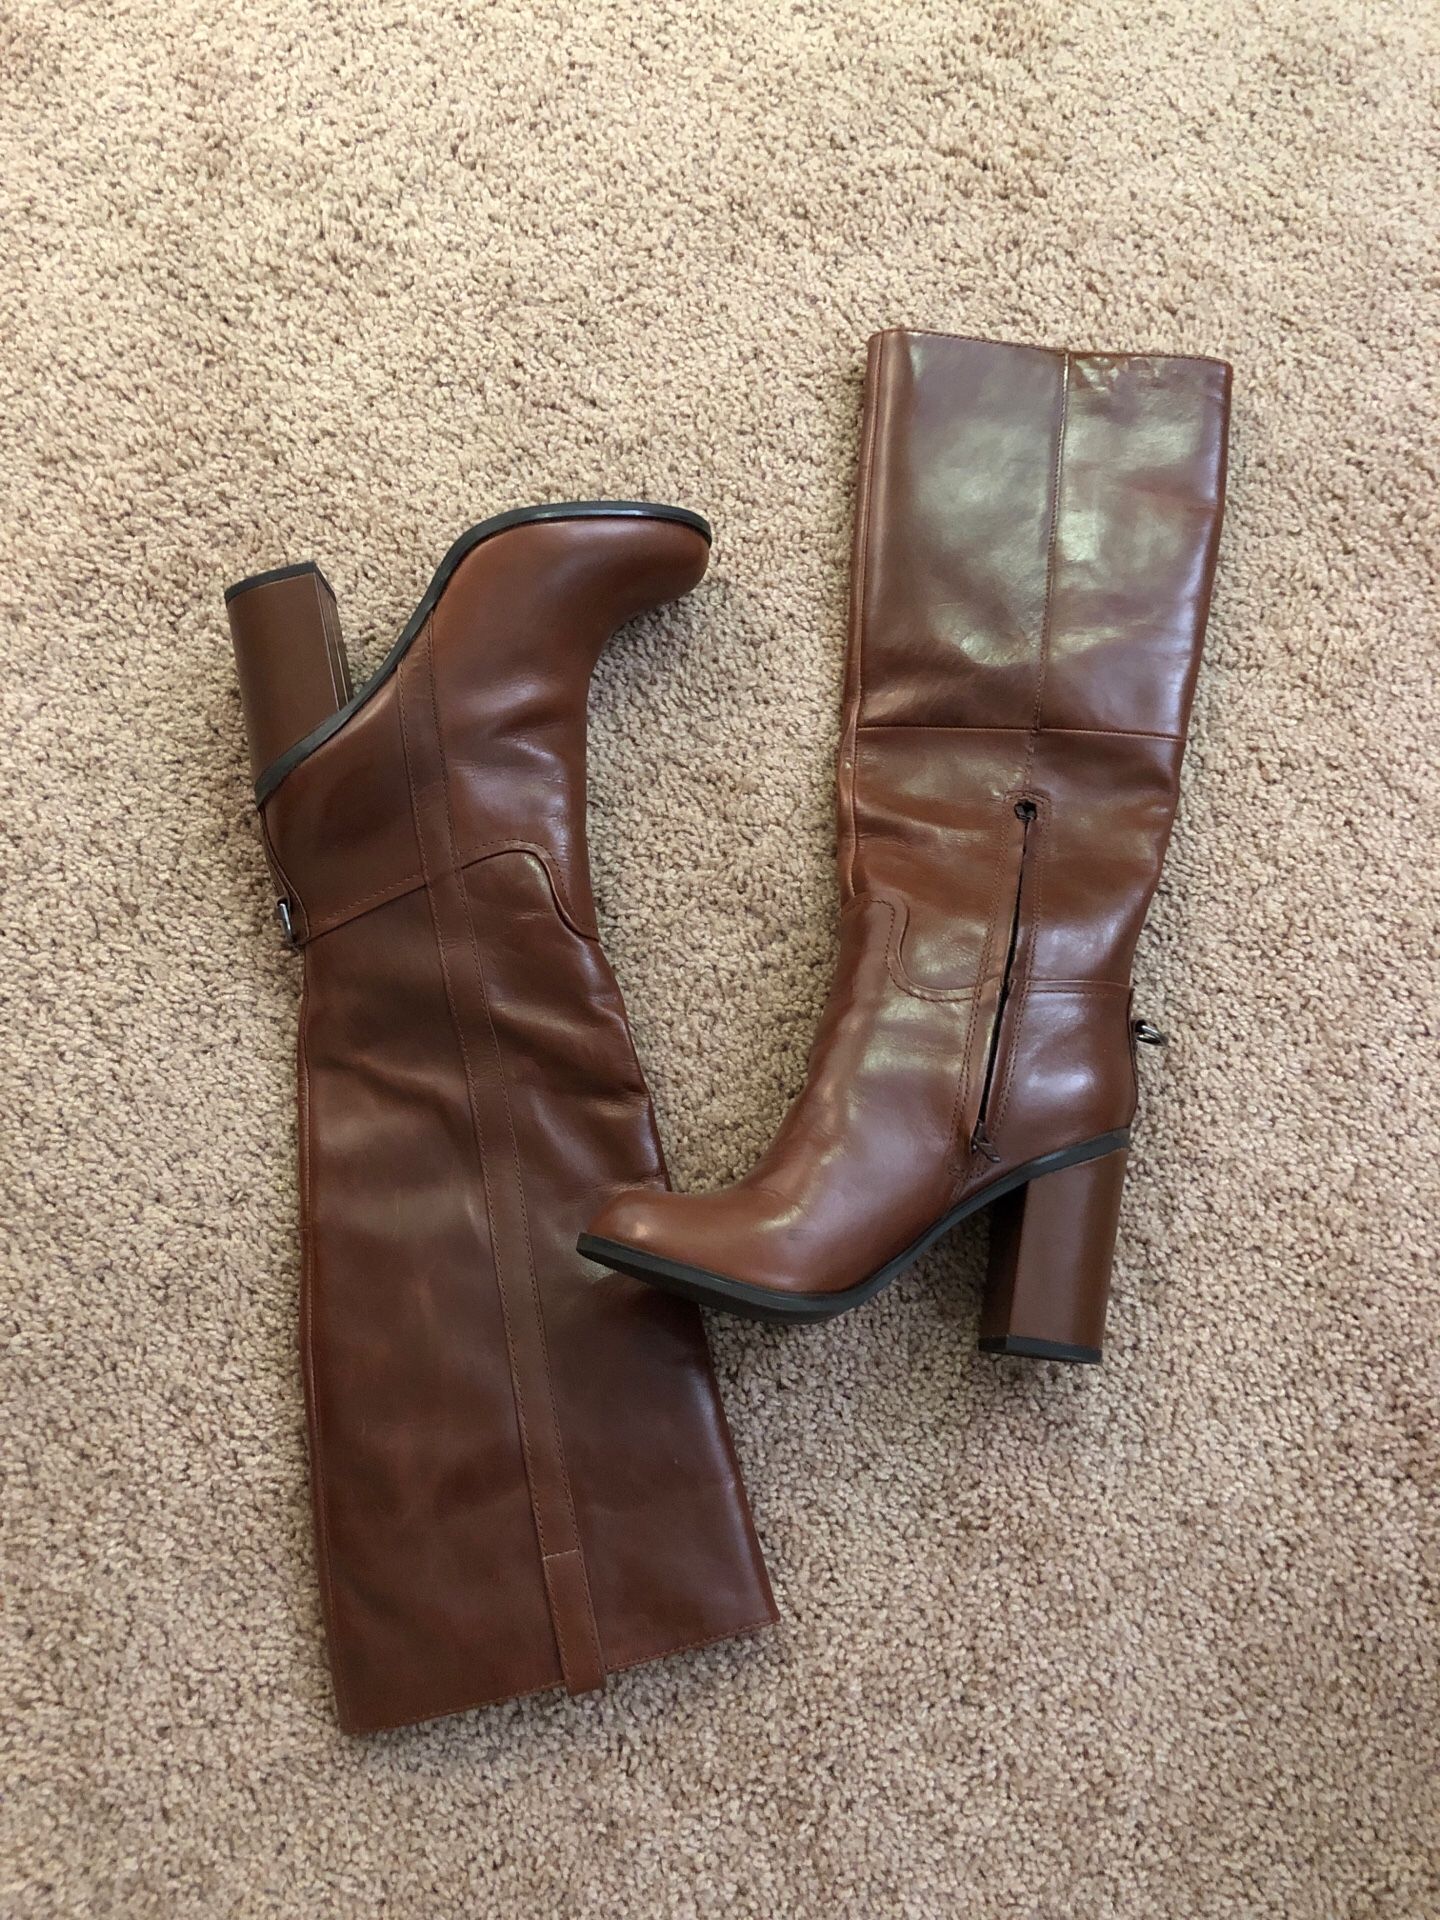 leather boots new never used size 8